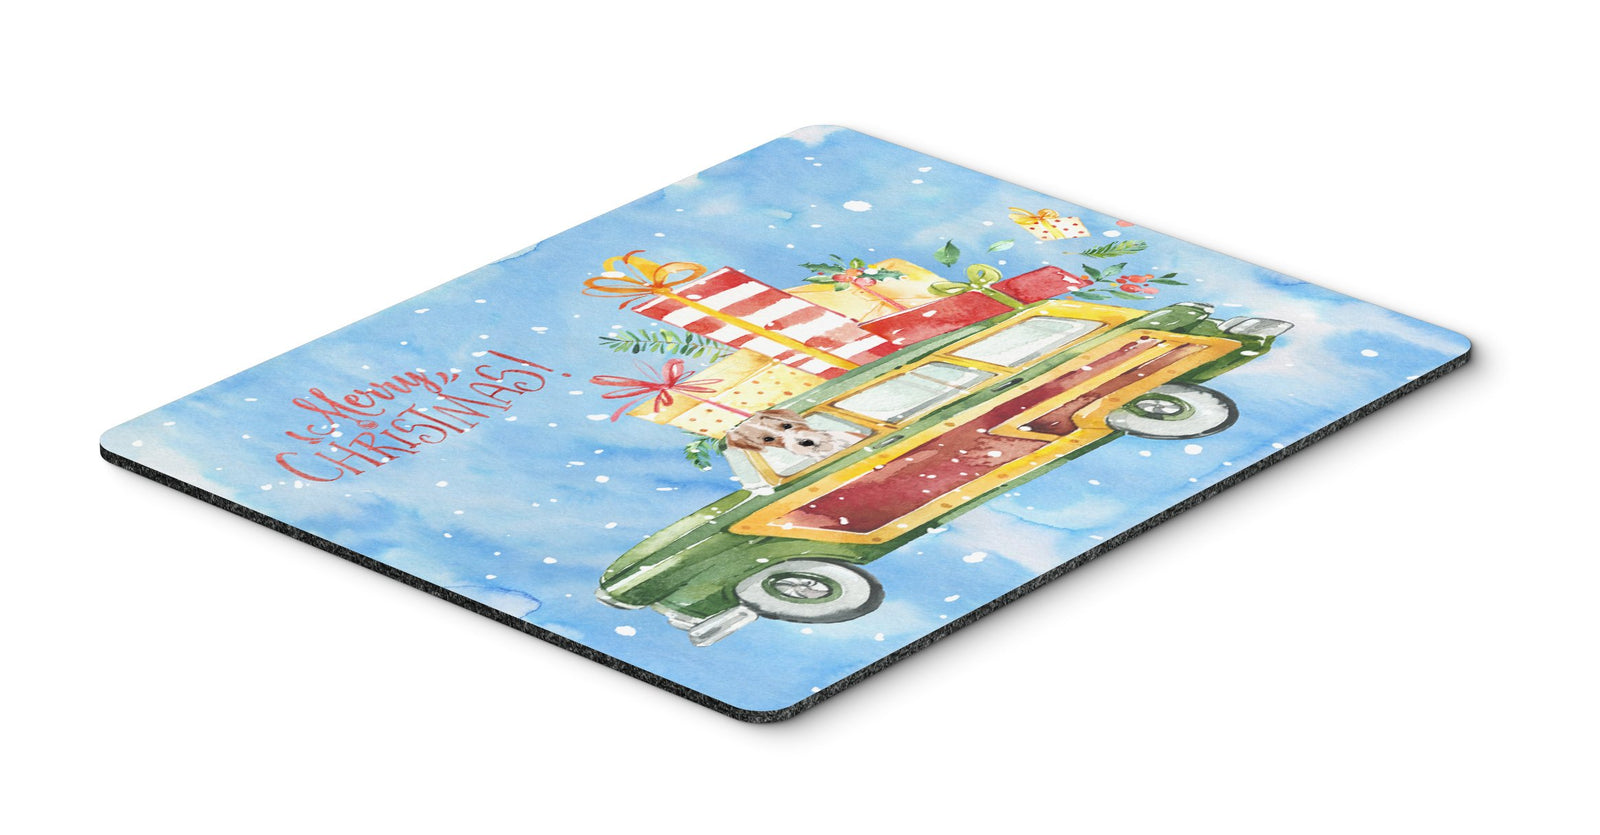 Merry Christmas Jack Russell Terrier Mouse Pad, Hot Pad or Trivet CK2467MP by Caroline's Treasures